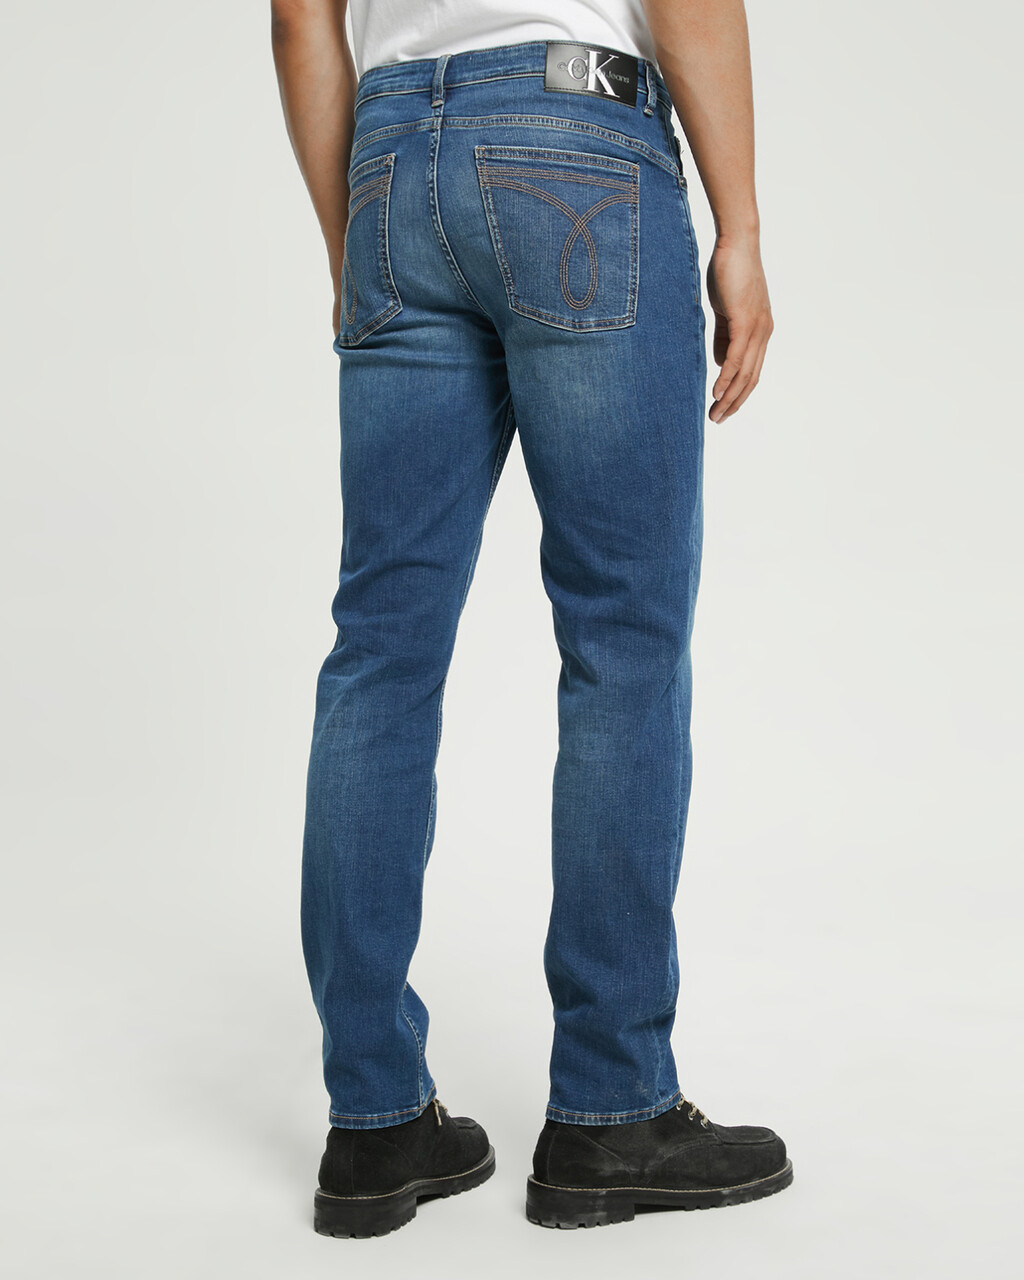 Mid Blue Stretch Body Jeans, Acd Mid Blue, hi-res